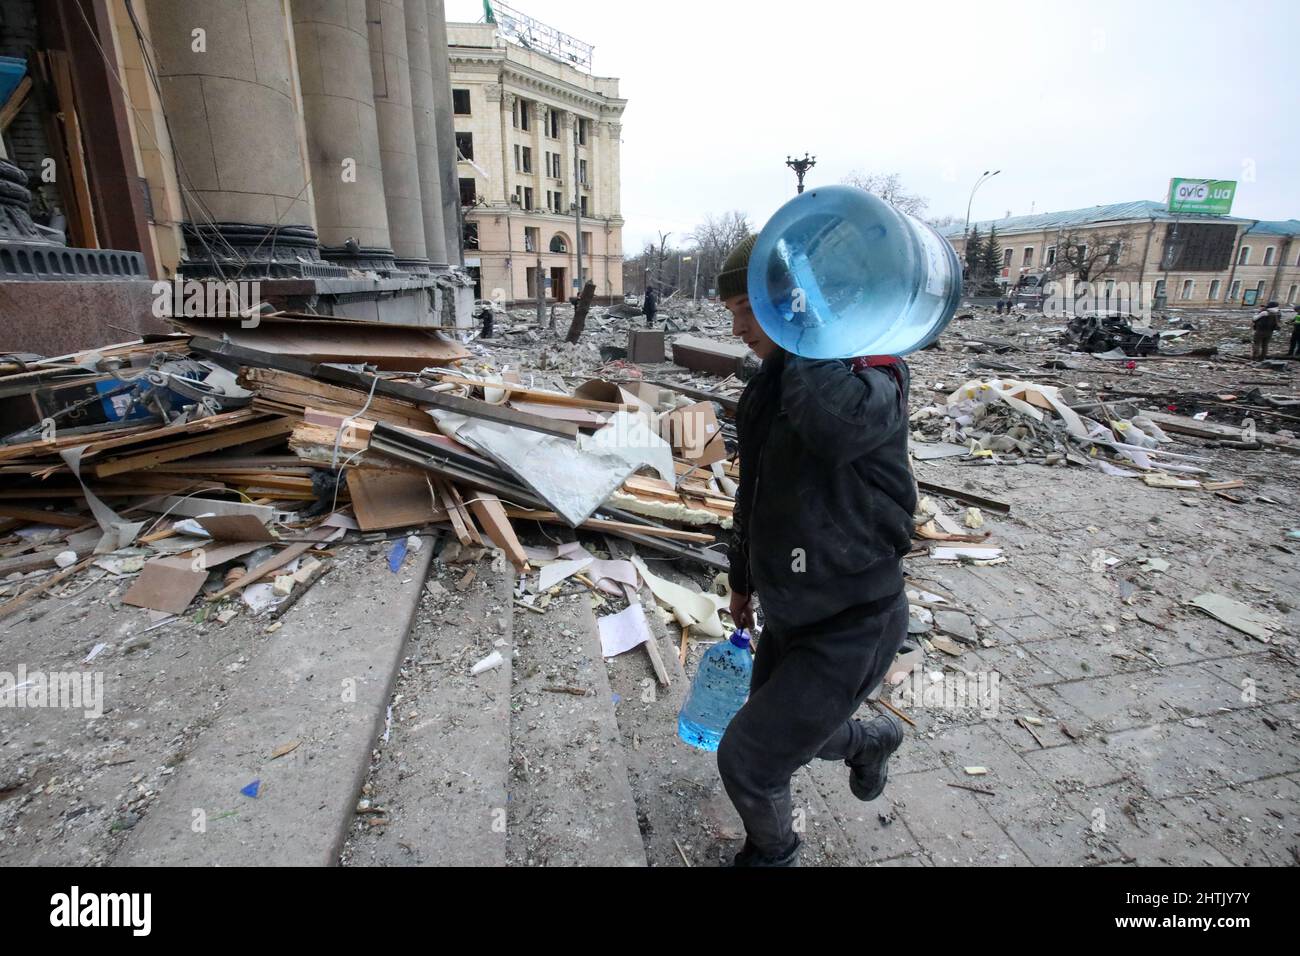 KHARKIV, UKRAINE - MARCH 1, 2022 - A man carries two bottles of water into the damaged building of the Kharkiv Regional State Administration after a missile launched by Russian invaders hit nearby in Svobody (Freedom) Square) at approximately 8 am local time on Tuesday, March 1, Kharkiv, northeastern Ukraine. Credit: Ukrinform/Alamy Live News Stock Photo